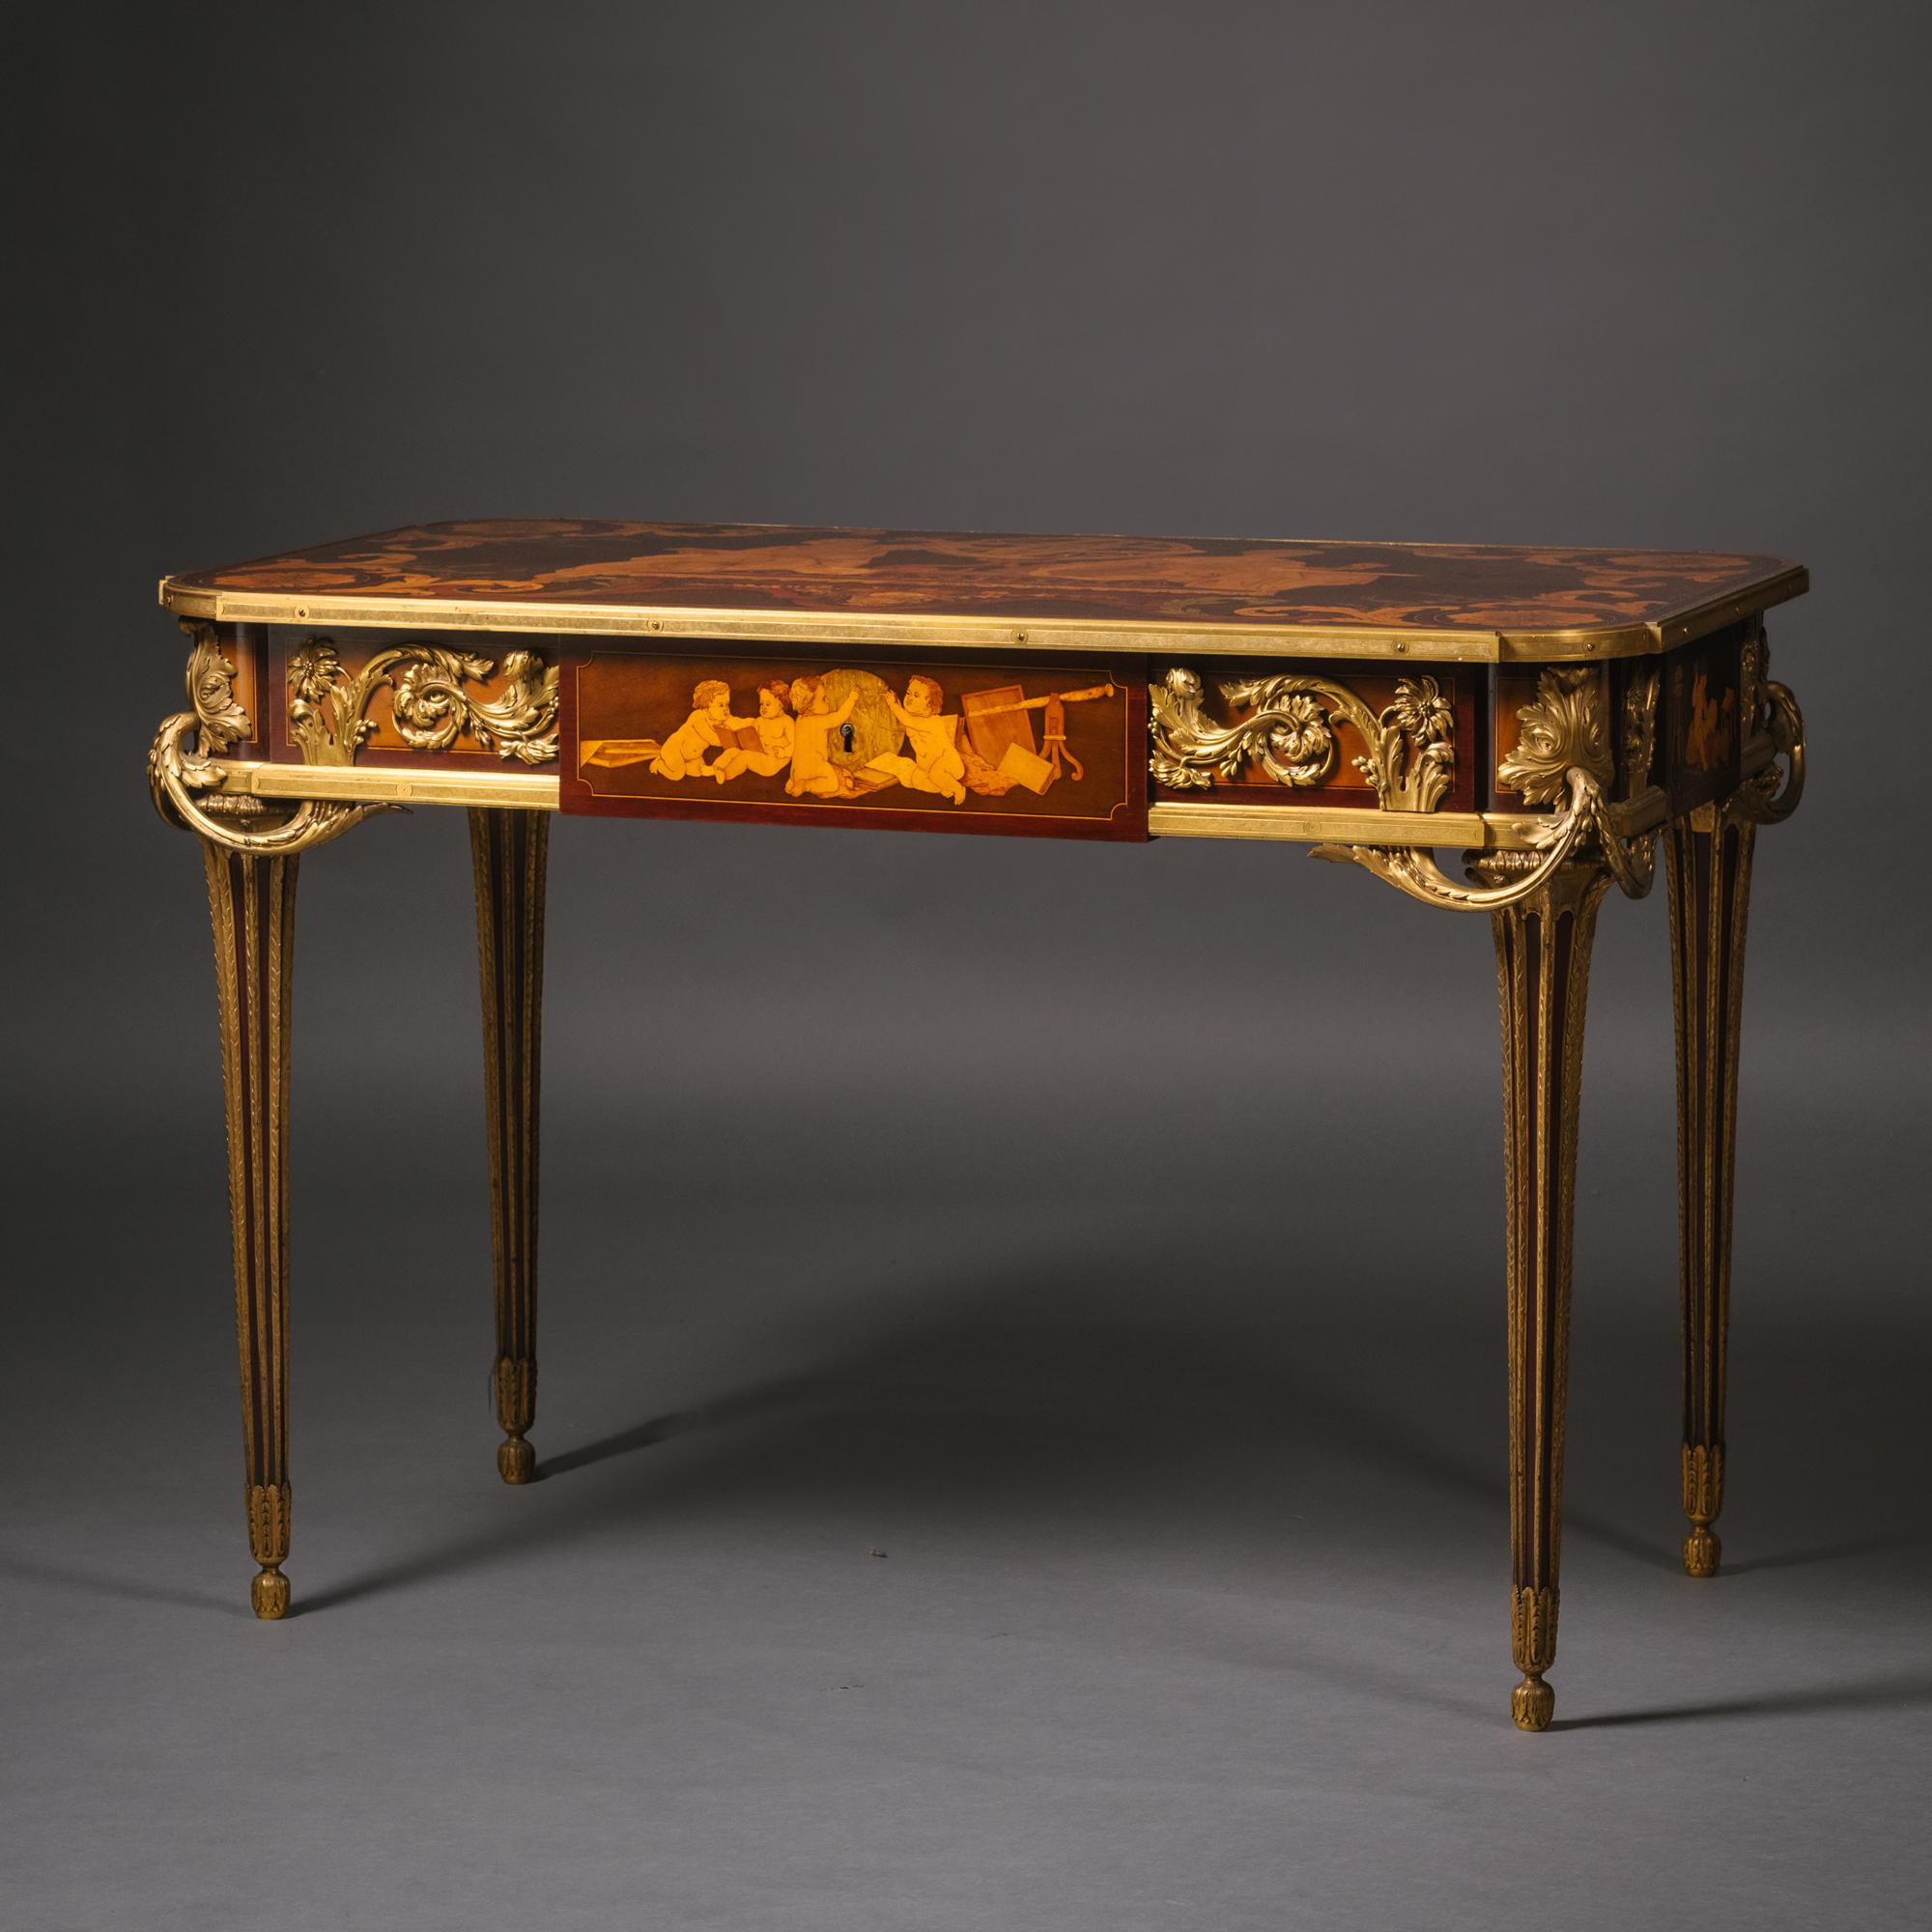 French Louis XVI Style Gilt-Bronze Mounted Marquetry Centre Table by Beurdeley For Sale